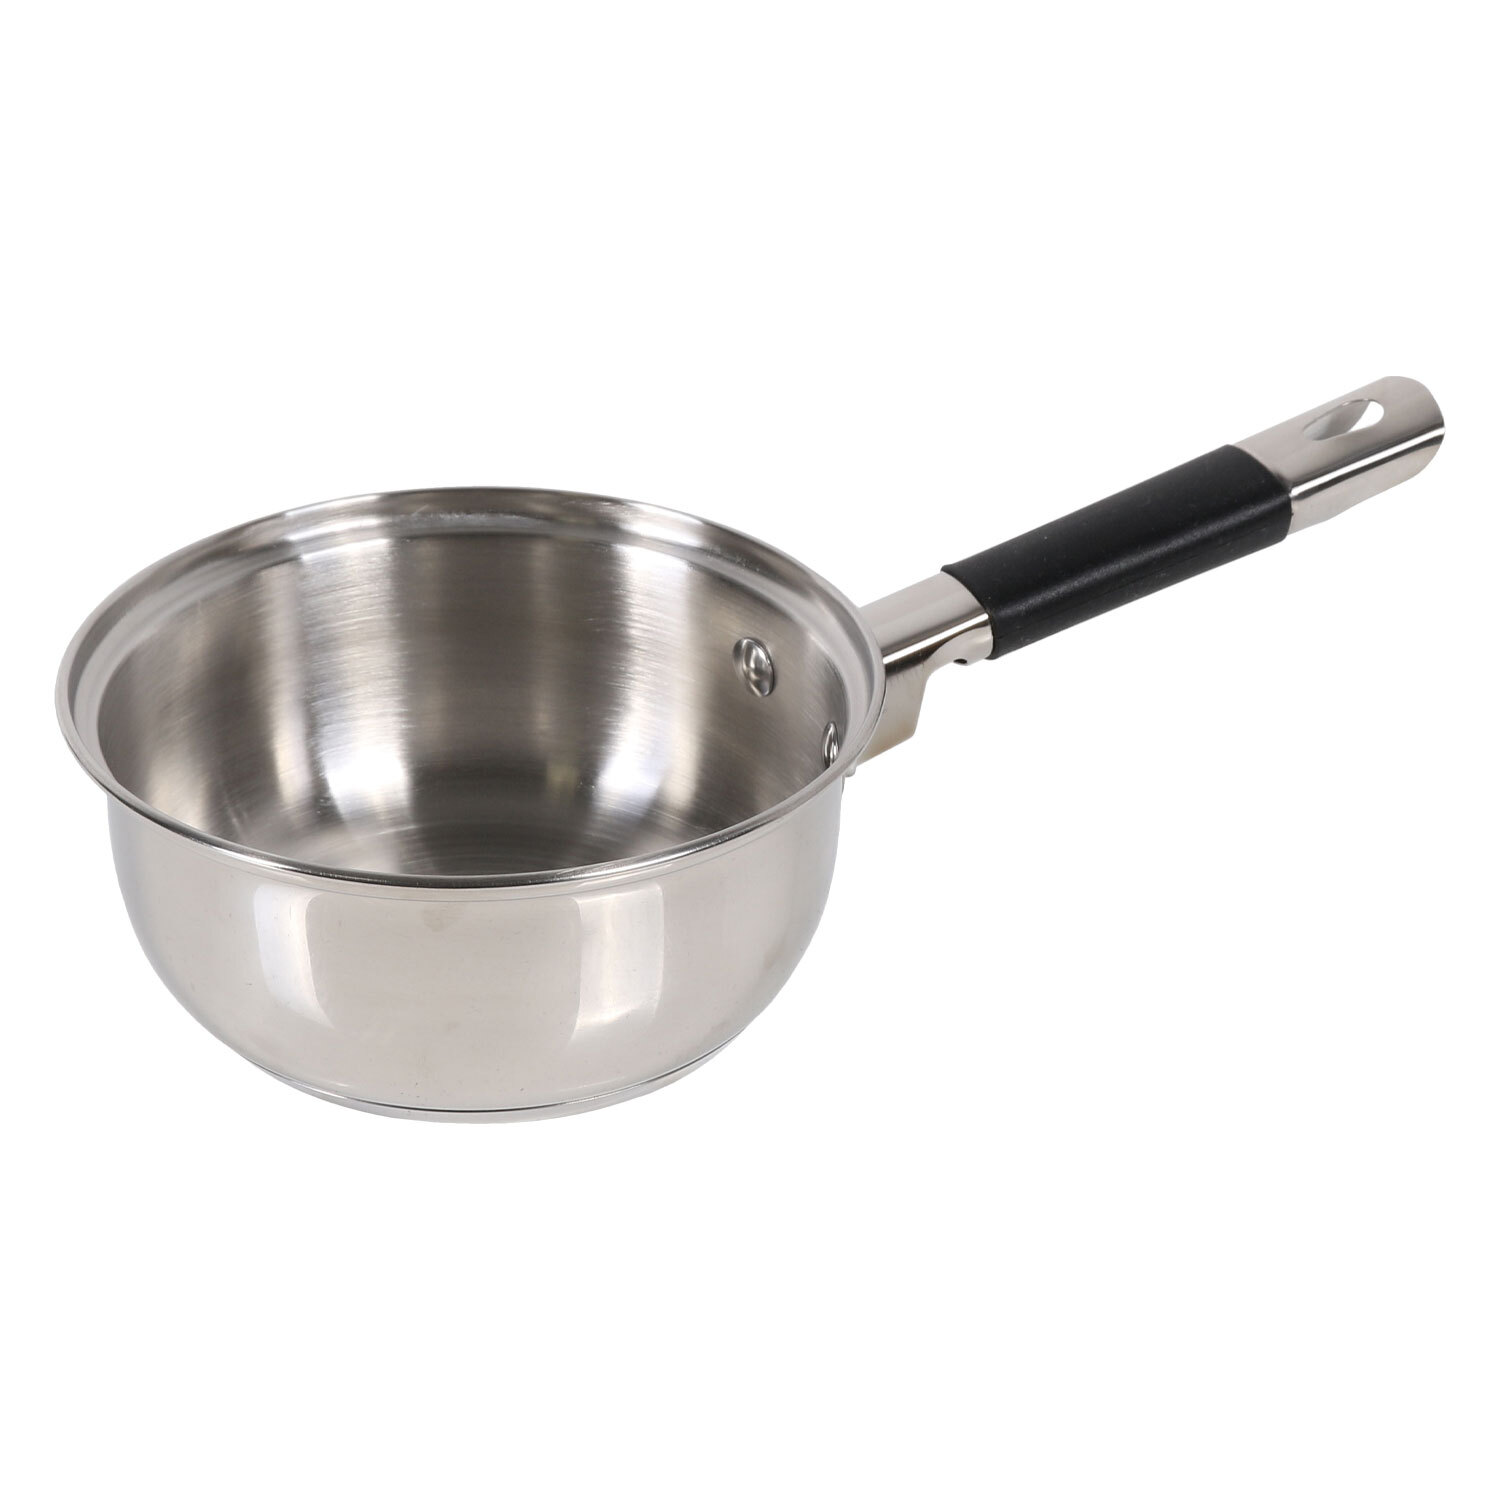 16cm Stainless Steel Saucepan with Lid Image 2